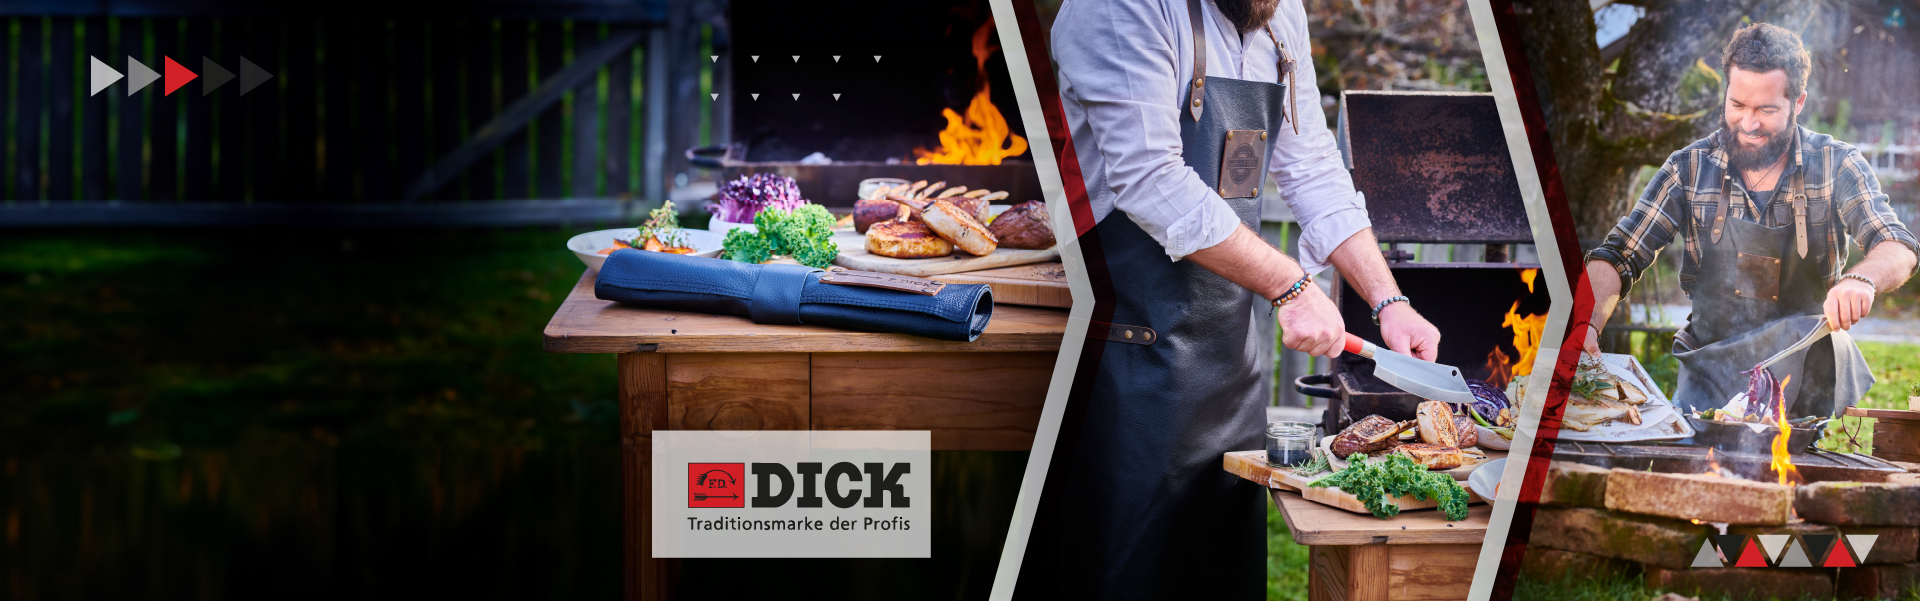 THE BEST DISCOUNTS ON DICK BBQ SETS